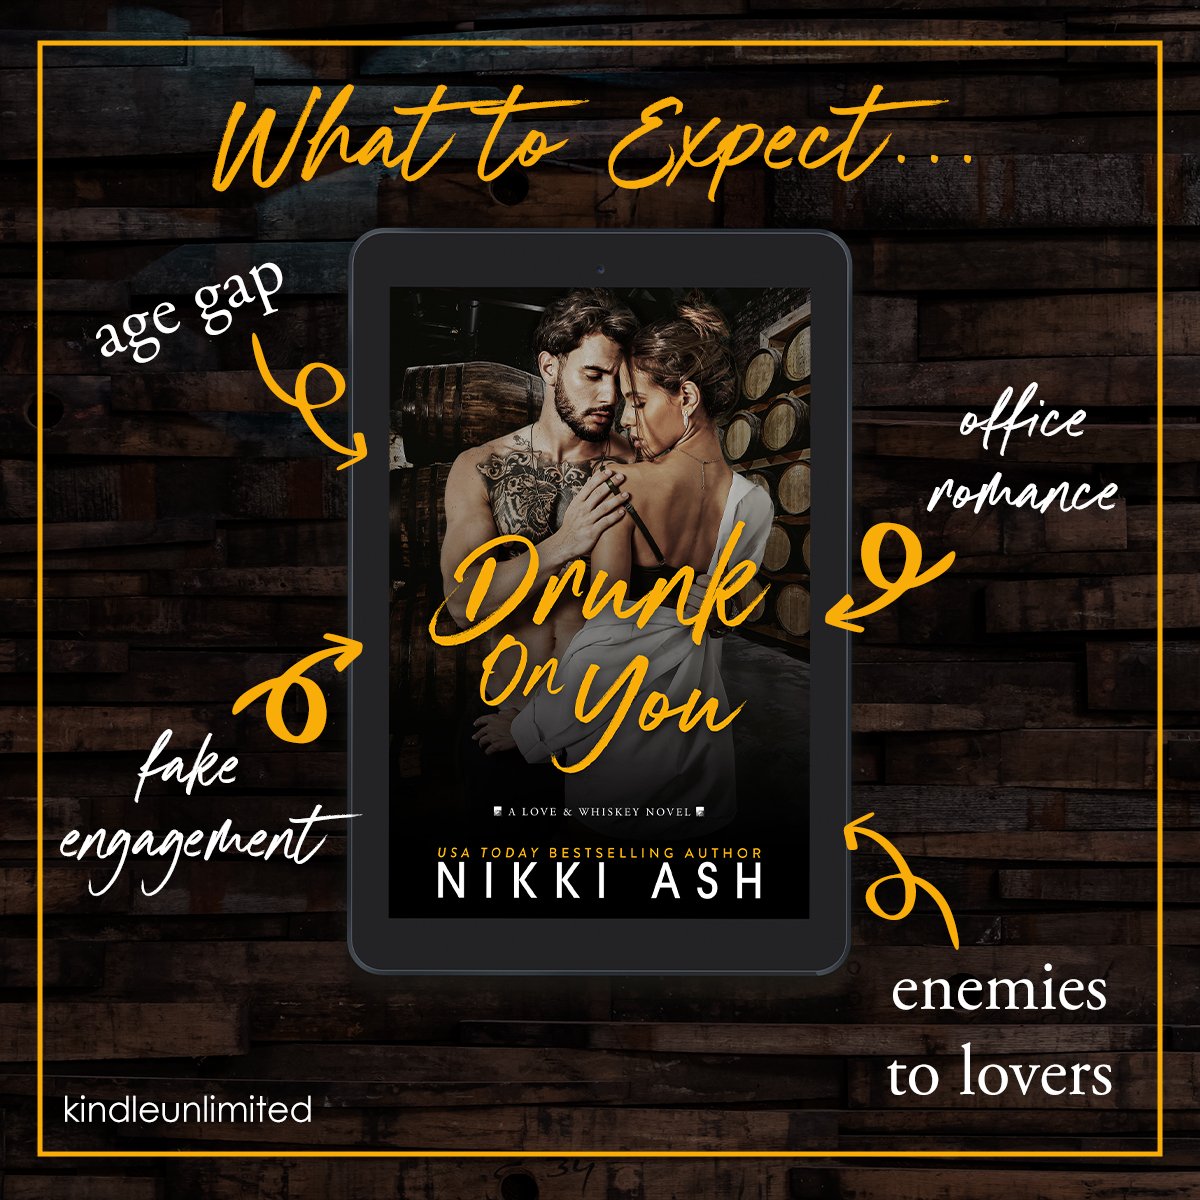 💄 Drunk on You (Love and Whiskey) by @AuthorNikkiAsh is 𝗟𝗜𝗩𝗘 𝗞𝗶𝗻𝗱𝗹𝗲 𝗨𝗻𝗹𝗶𝗺𝗶𝘁𝗲𝗱 → amzn.to/3SOkdJt 𝗪𝗵𝗮𝘁 𝘆𝗼𝘂 𝗰𝗮𝗻 𝗲𝘅𝗽𝗲𝗰𝘁: 🥃 Fake engagement 🥃 Age gap 🥃 Enemies to lovers 🥃 Office romance @theauthoragency @EJBookPromos